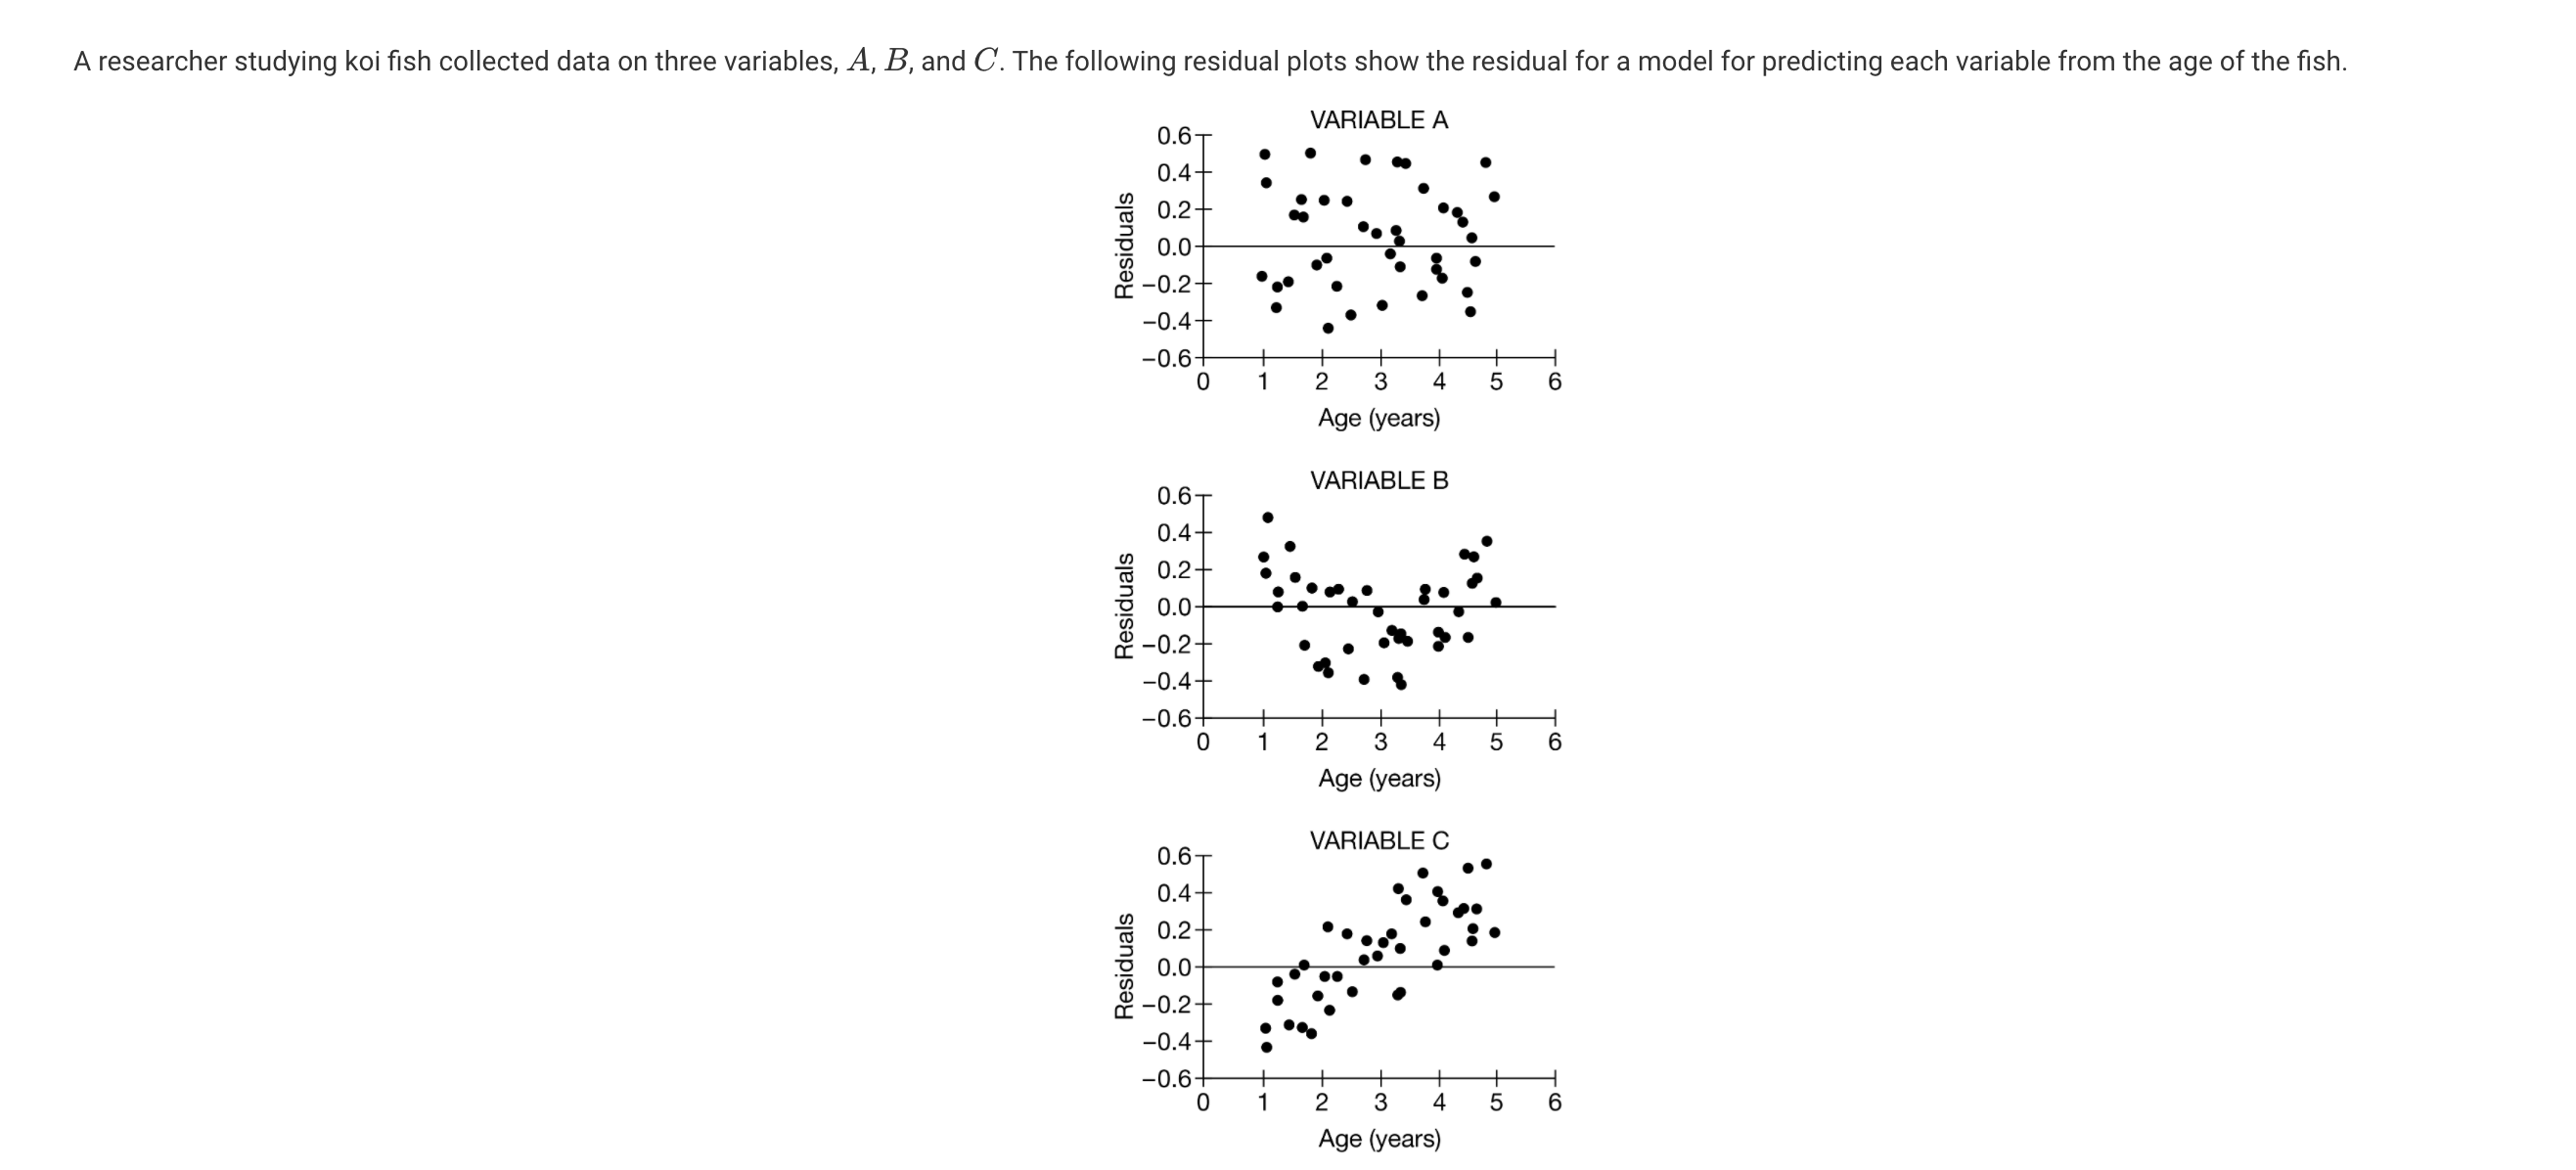 A researcher studying koi fish collected data on three variables, A, B, and C. The following residual plots show the residual for a model for predicting each variable from the age of the fish.
VARIABLE A
0.6T
0.4+
0.2+
0.0
-0.2
-0.4+
-0.6+
+
+
4
2
6
Age (years)
VARIABLE B
0.6T
0.4+
0.2+
0.0-
-0.2+
-0.4+
-0.6-
+
1
+
3
4
Age (years)
VARIABLE C
0.6T
0.4
Residuals
Residuals
-LO
